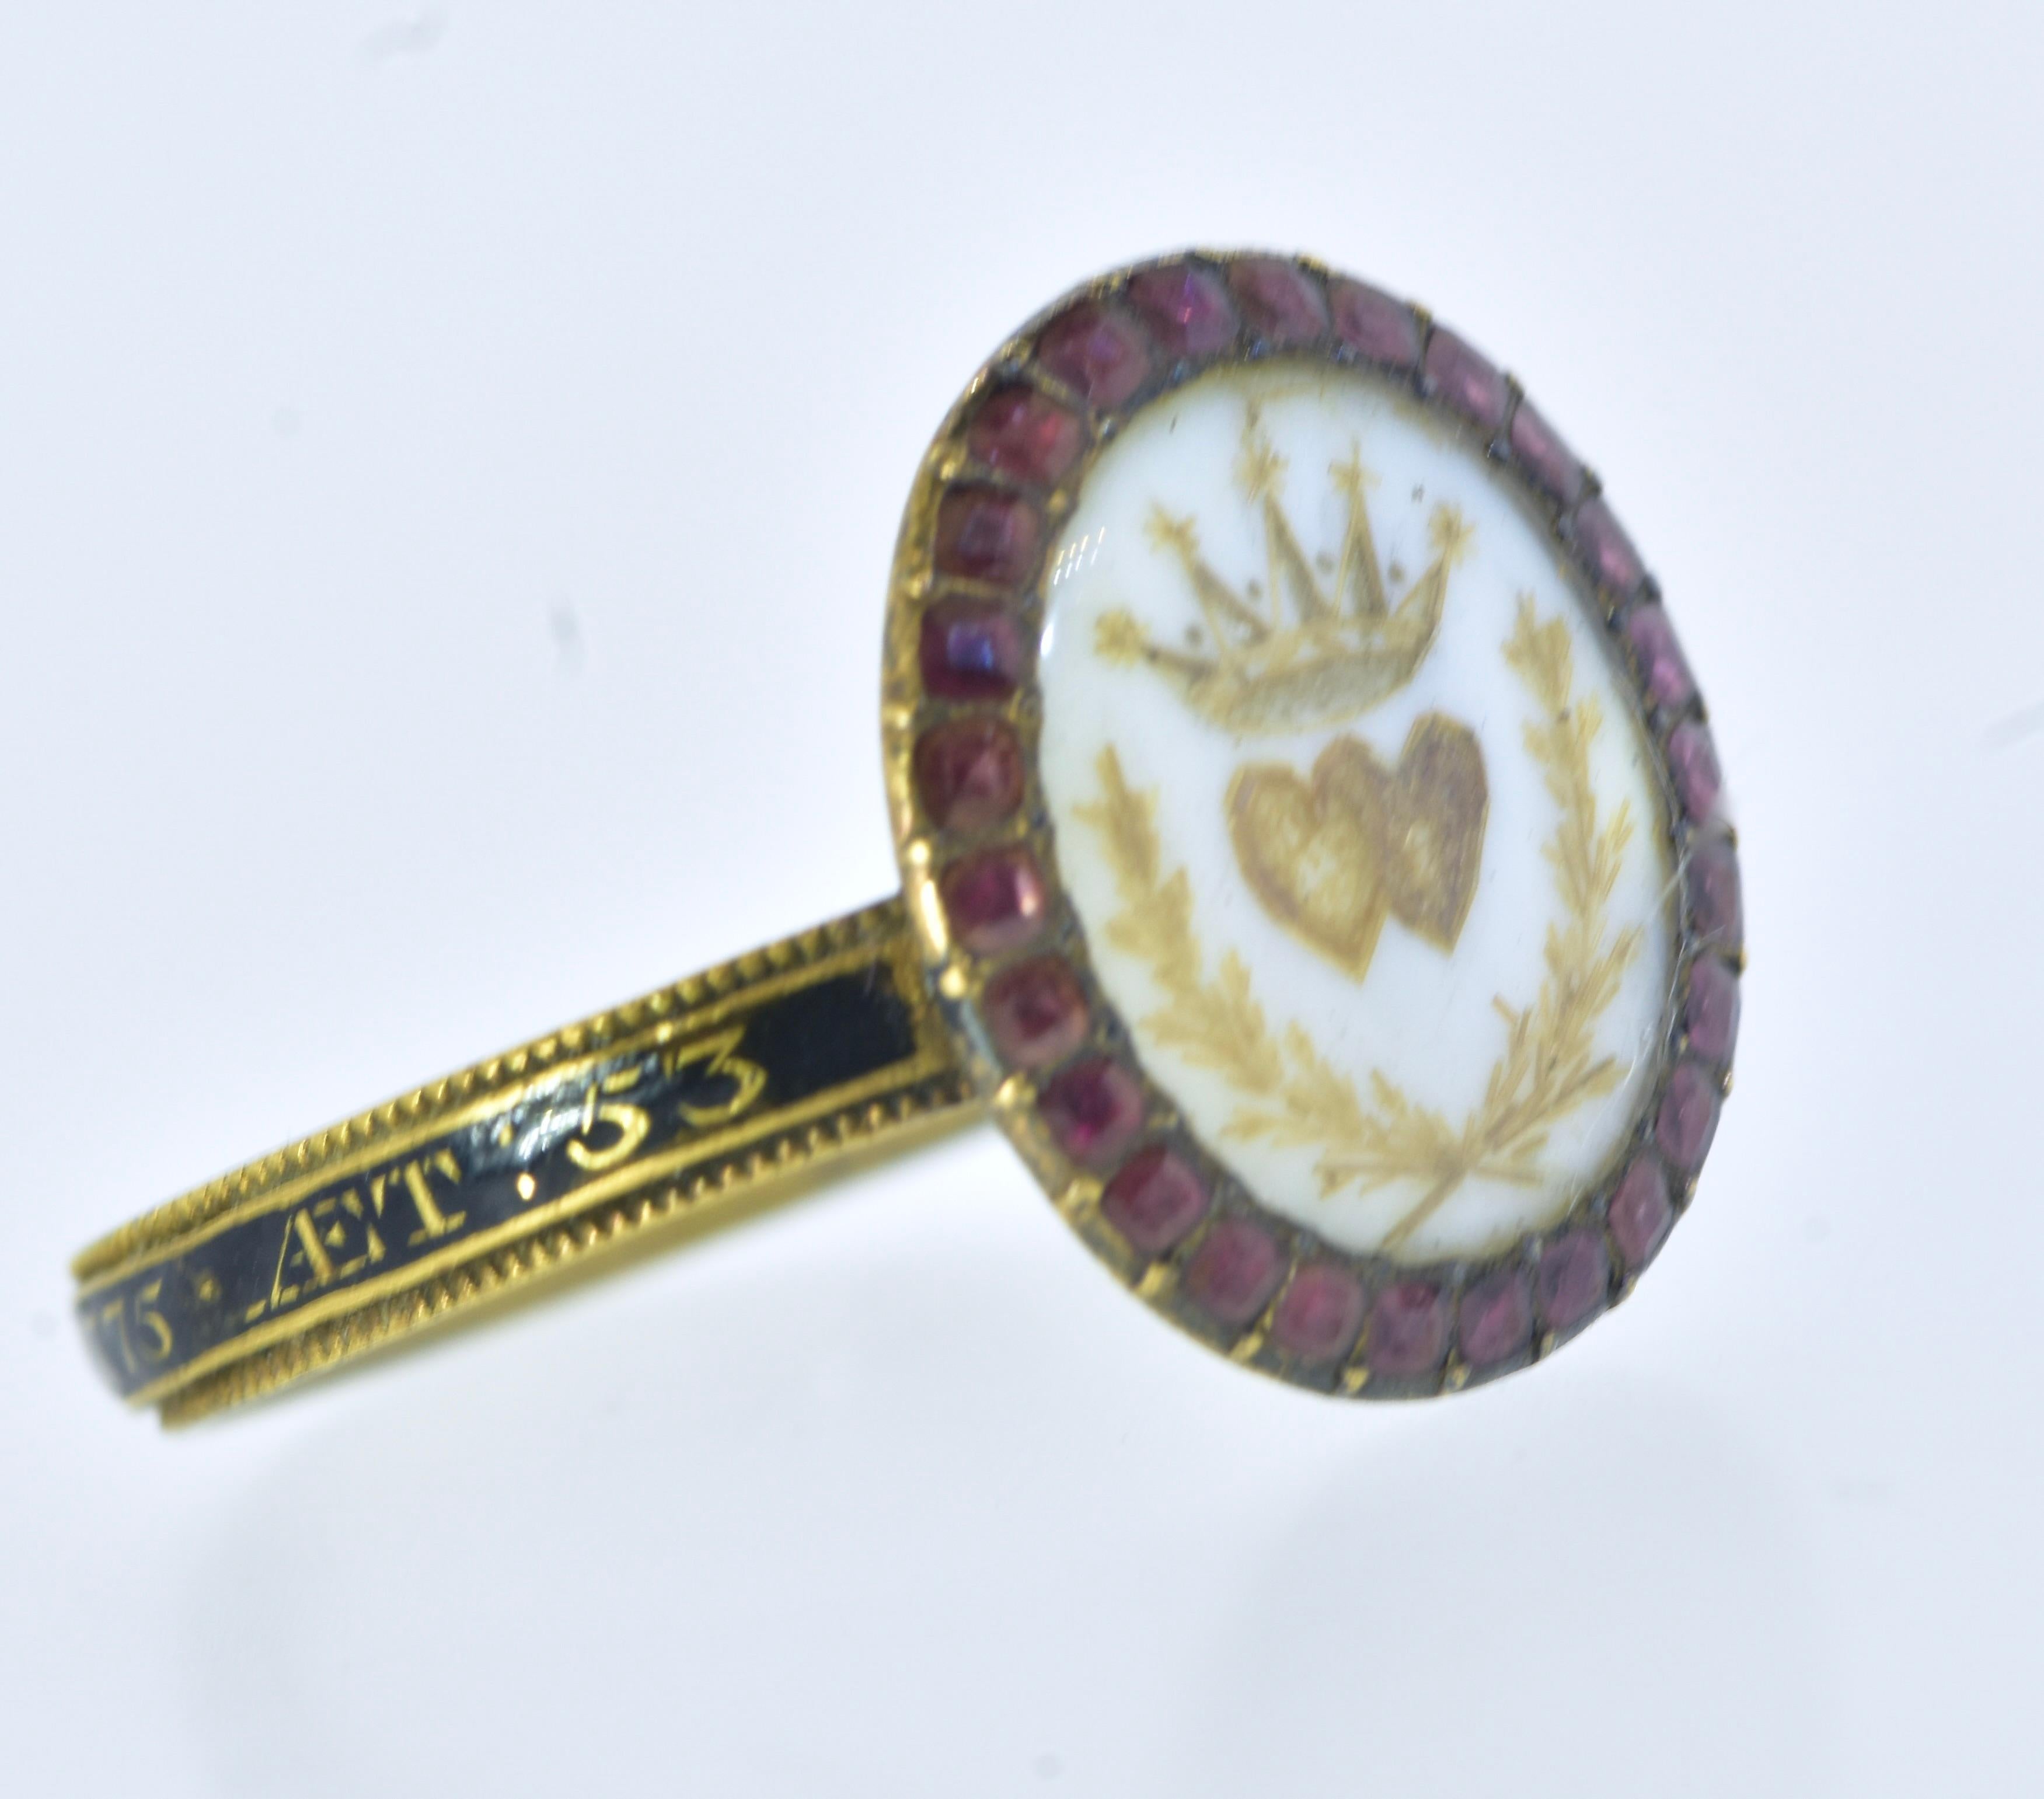 Antique Cushion Cut 18th Century 18K Memorial Ring Centering Two Hearts & Surround by Garnets Amer. 